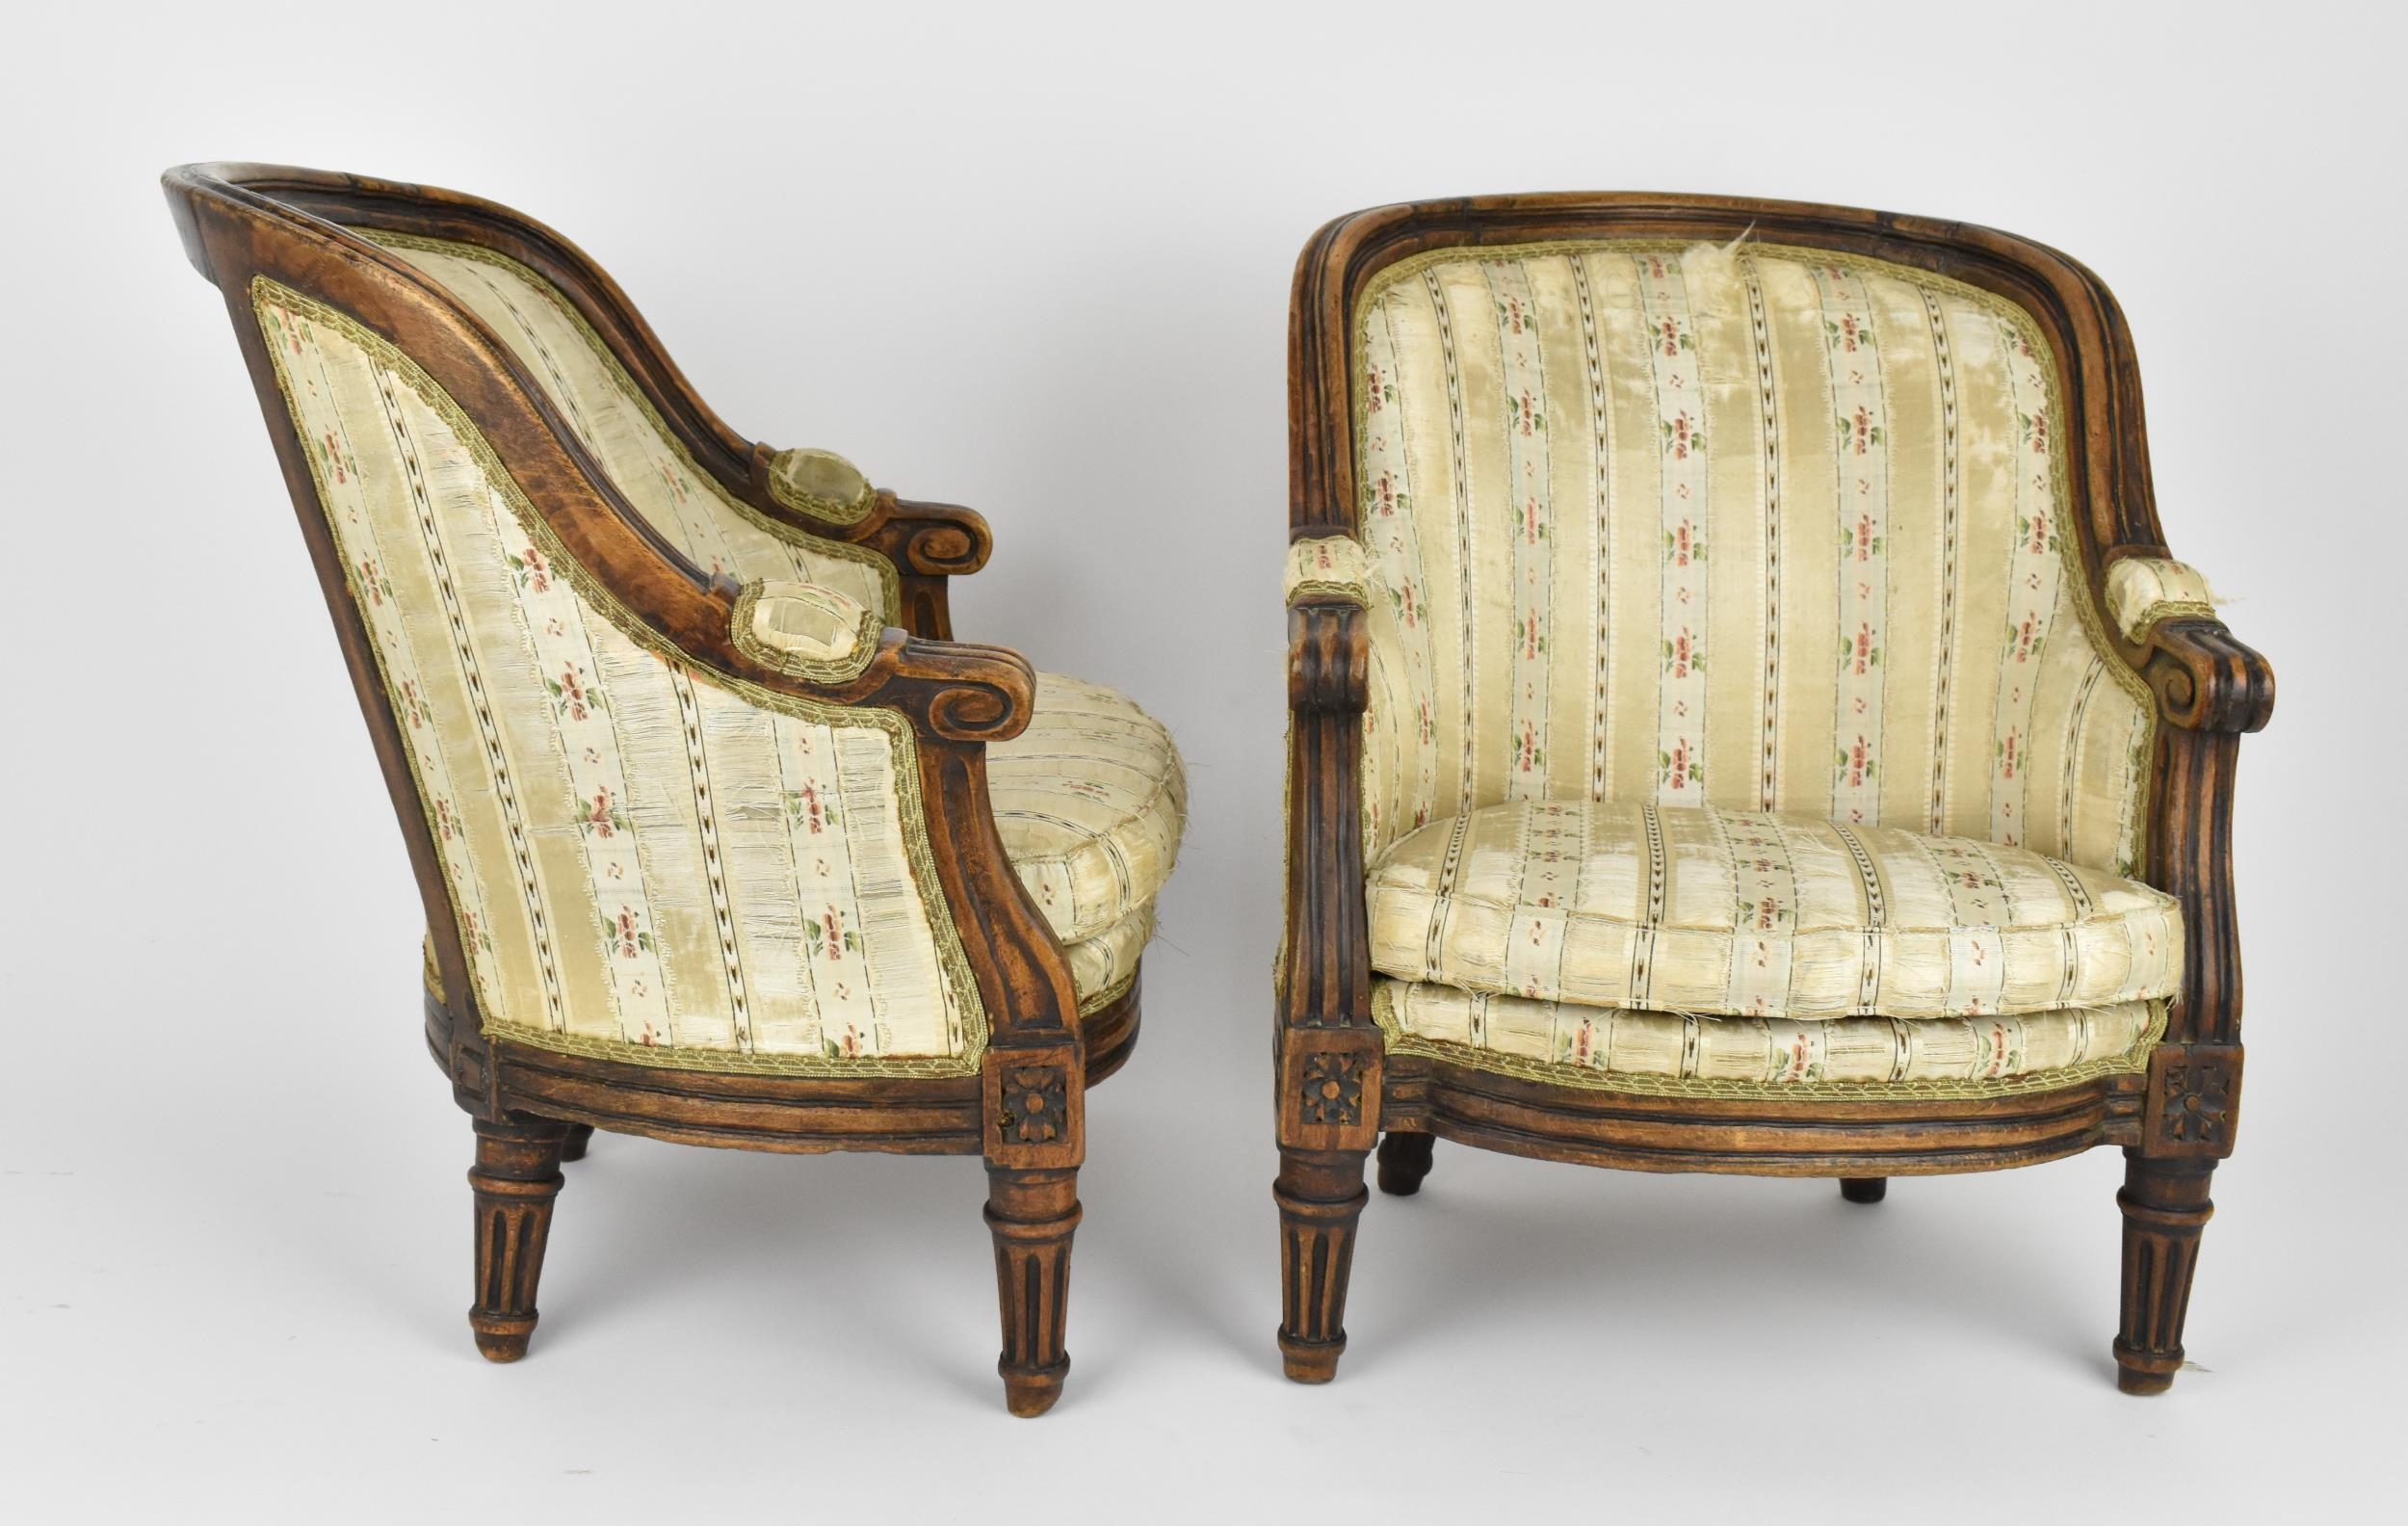 A pair of 18th century French Louis XVI bergère armchairs, circa 1780, with channelled mahogany - Image 3 of 9